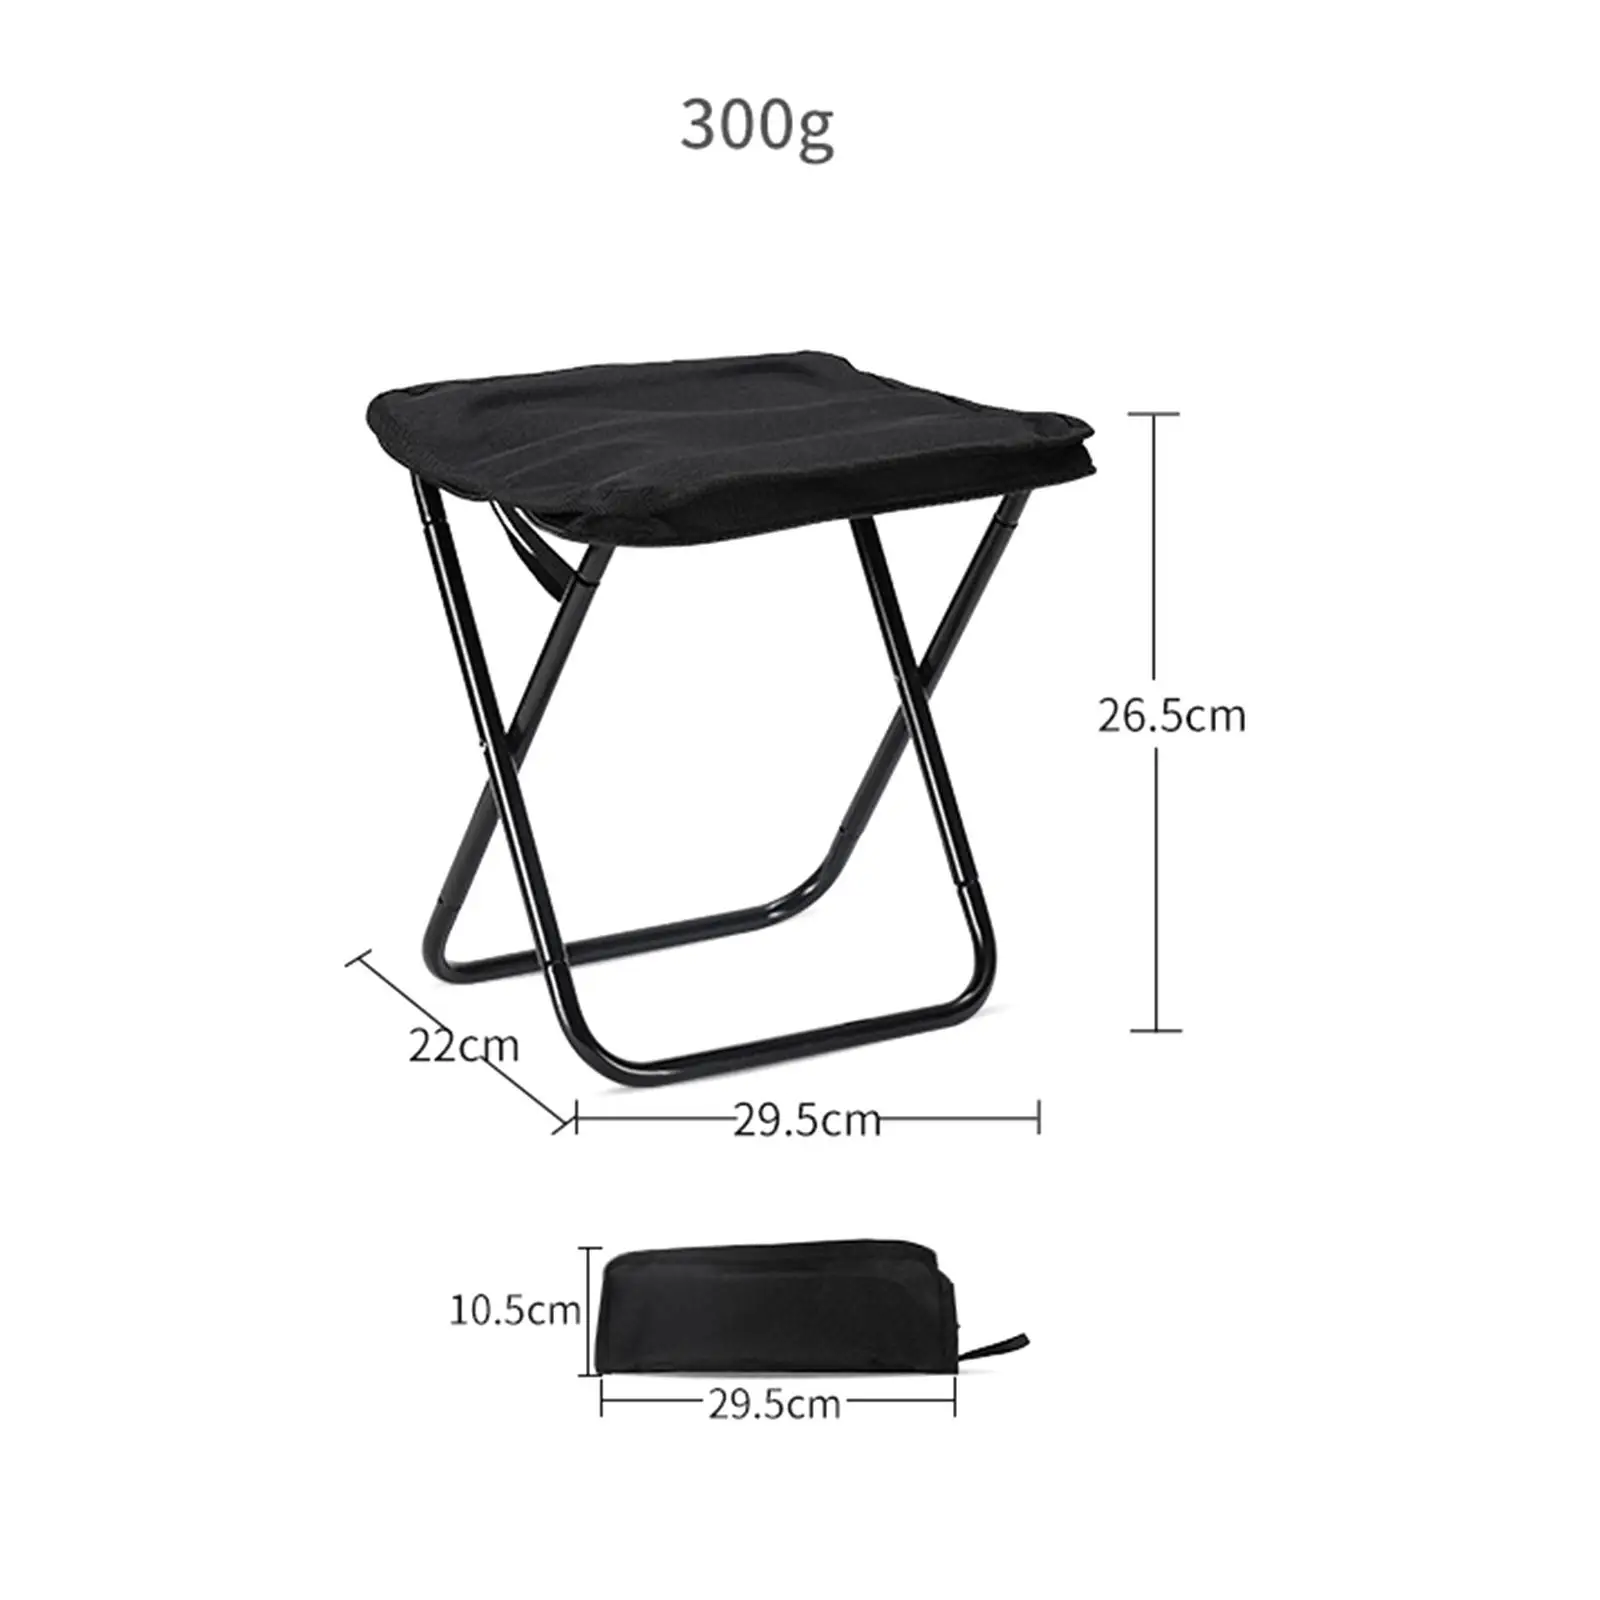 Camping stool, camping stool, adult compact chair, sturdy portable chair, mini